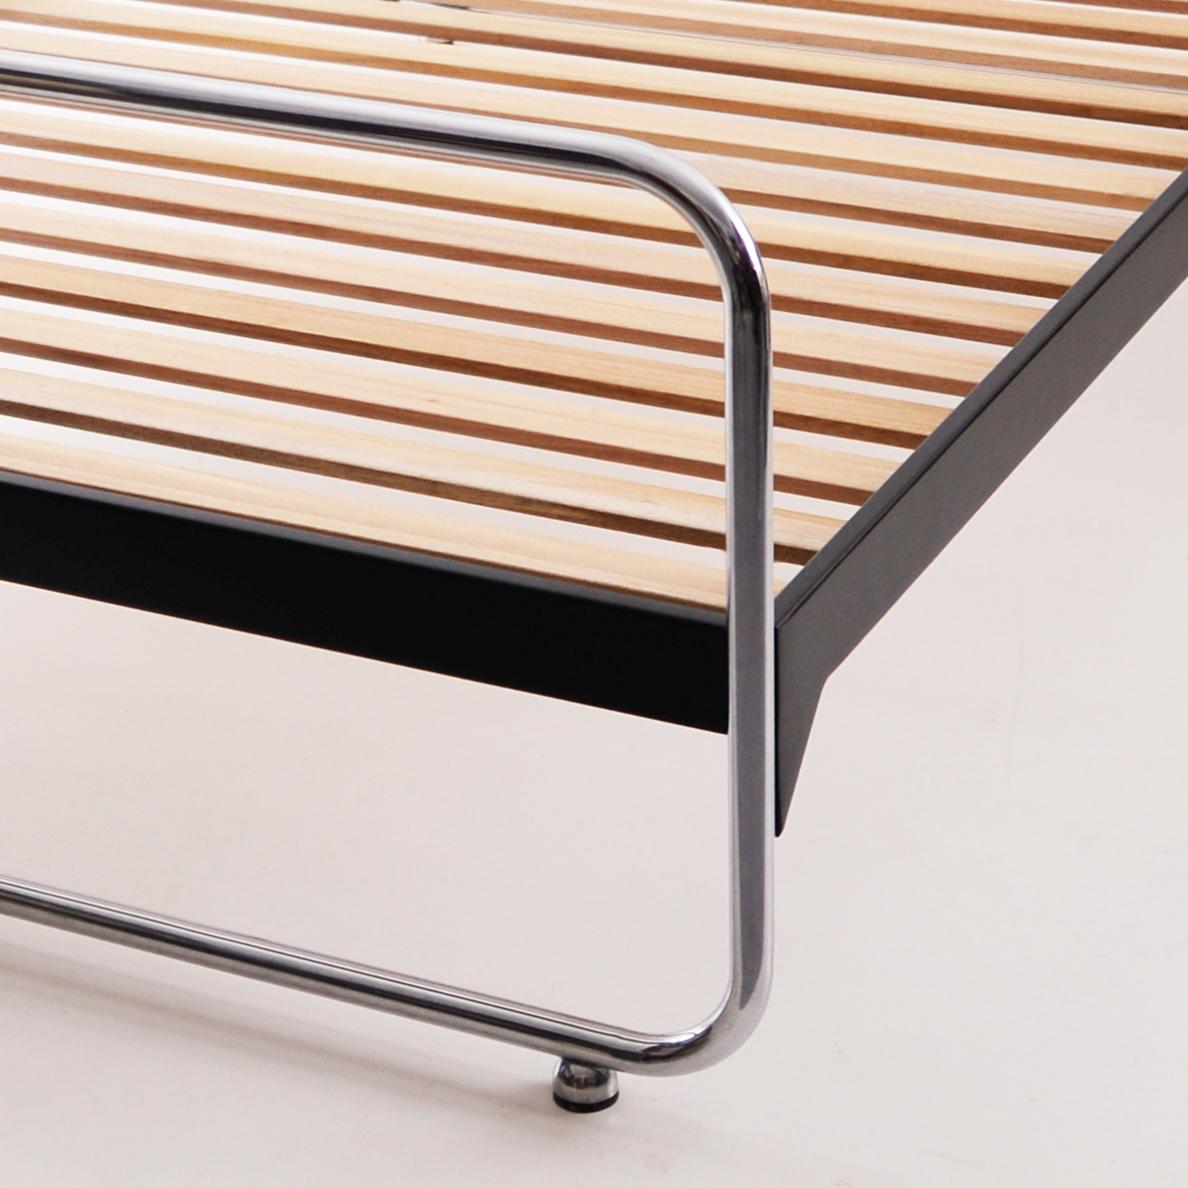 Lacquered Customised Original Tubular Steel Futon Bed in German Modernism Style